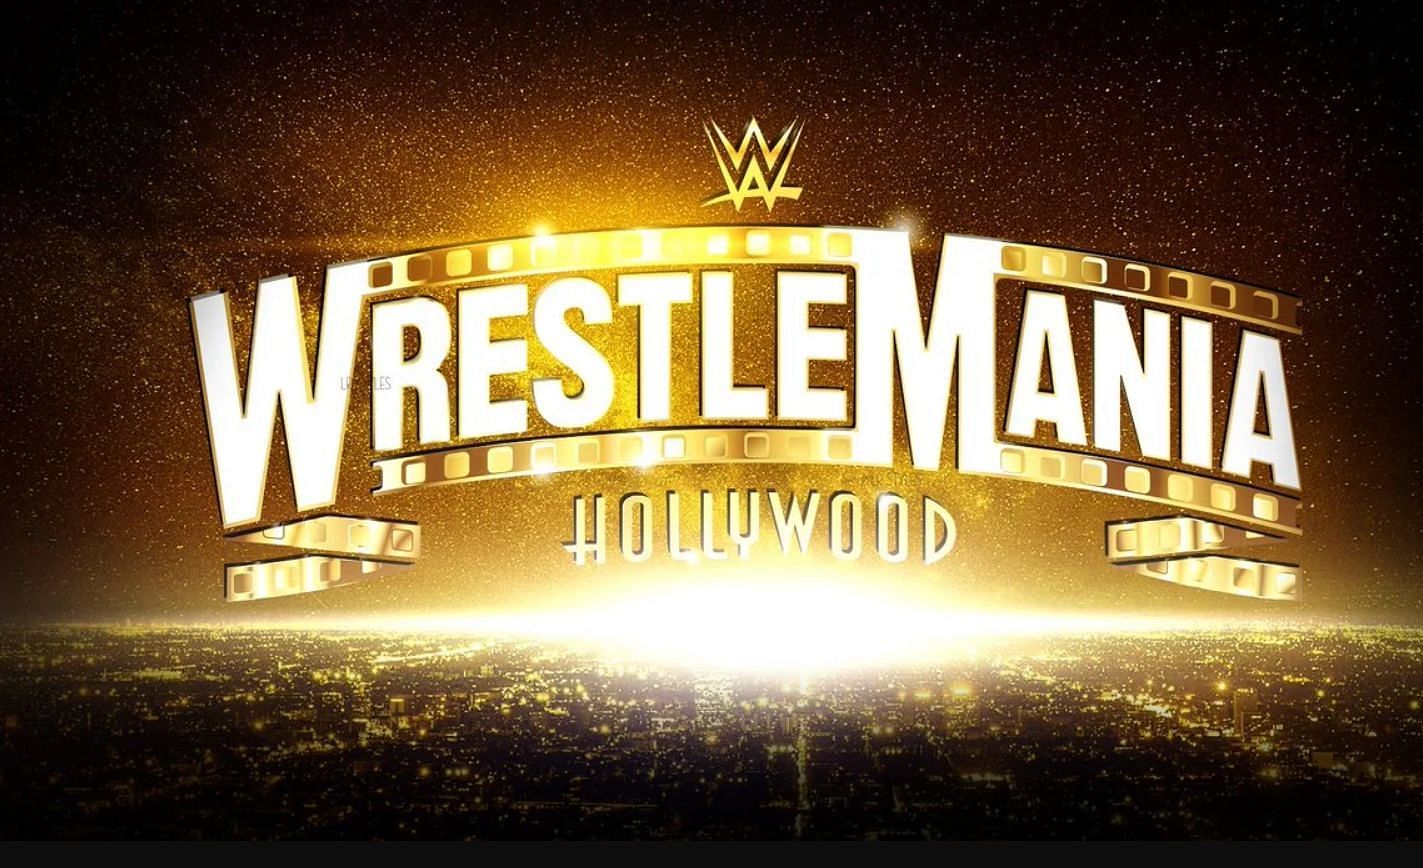 WWE WrestleMania 39 will take place in Inglewood, CL on April 1-2